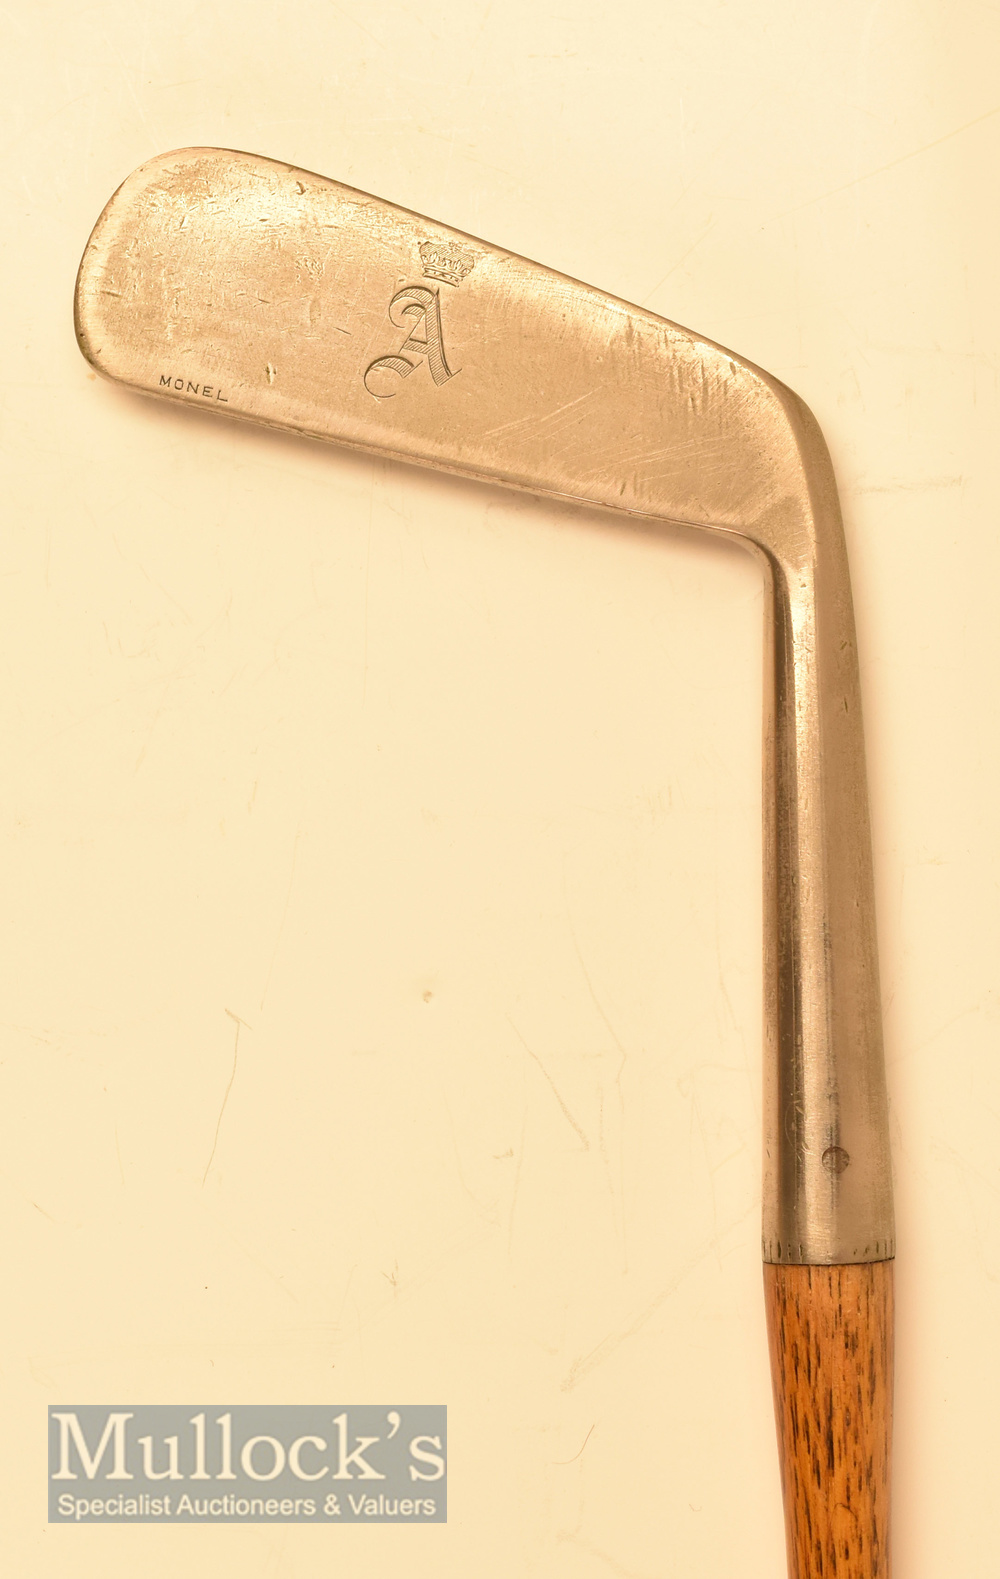 Of historical importance - Prince Albert, later King George VI personally owned monel metal blade - Image 2 of 4